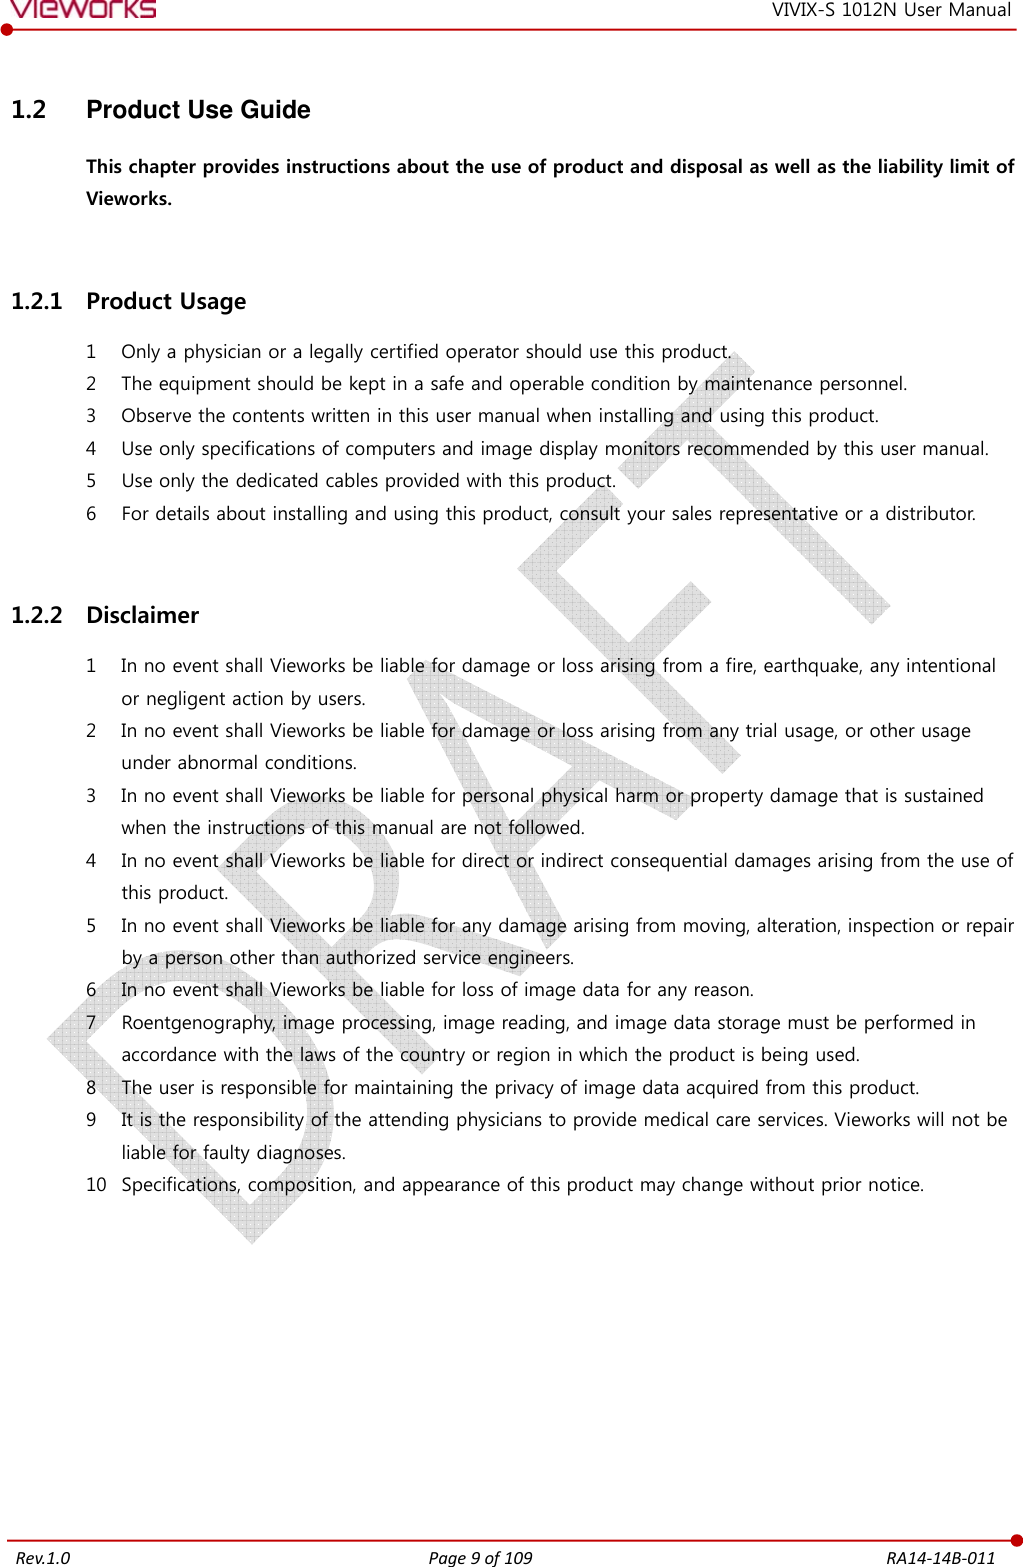   Rev.1.0 Page 9 of 109  RA14-14B-011 VIVIX-S 1012N User Manual 1.2  Product Use Guide This chapter provides instructions about the use of product and disposal as well as the liability limit of Vieworks.  1.2.1 Product Usage 1 Only a physician or a legally certified operator should use this product. 2 The equipment should be kept in a safe and operable condition by maintenance personnel. 3 Observe the contents written in this user manual when installing and using this product. 4 Use only specifications of computers and image display monitors recommended by this user manual. 5 Use only the dedicated cables provided with this product. 6 For details about installing and using this product, consult your sales representative or a distributor.  1.2.2 Disclaimer 1 In no event shall Vieworks be liable for damage or loss arising from a fire, earthquake, any intentional or negligent action by users. 2 In no event shall Vieworks be liable for damage or loss arising from any trial usage, or other usage under abnormal conditions. 3 In no event shall Vieworks be liable for personal physical harm or property damage that is sustained when the instructions of this manual are not followed. 4 In no event shall Vieworks be liable for direct or indirect consequential damages arising from the use of this product. 5 In no event shall Vieworks be liable for any damage arising from moving, alteration, inspection or repair by a person other than authorized service engineers. 6 In no event shall Vieworks be liable for loss of image data for any reason. 7 Roentgenography, image processing, image reading, and image data storage must be performed in accordance with the laws of the country or region in which the product is being used. 8 The user is responsible for maintaining the privacy of image data acquired from this product. 9 It is the responsibility of the attending physicians to provide medical care services. Vieworks will not be liable for faulty diagnoses. 10 Specifications, composition, and appearance of this product may change without prior notice.         